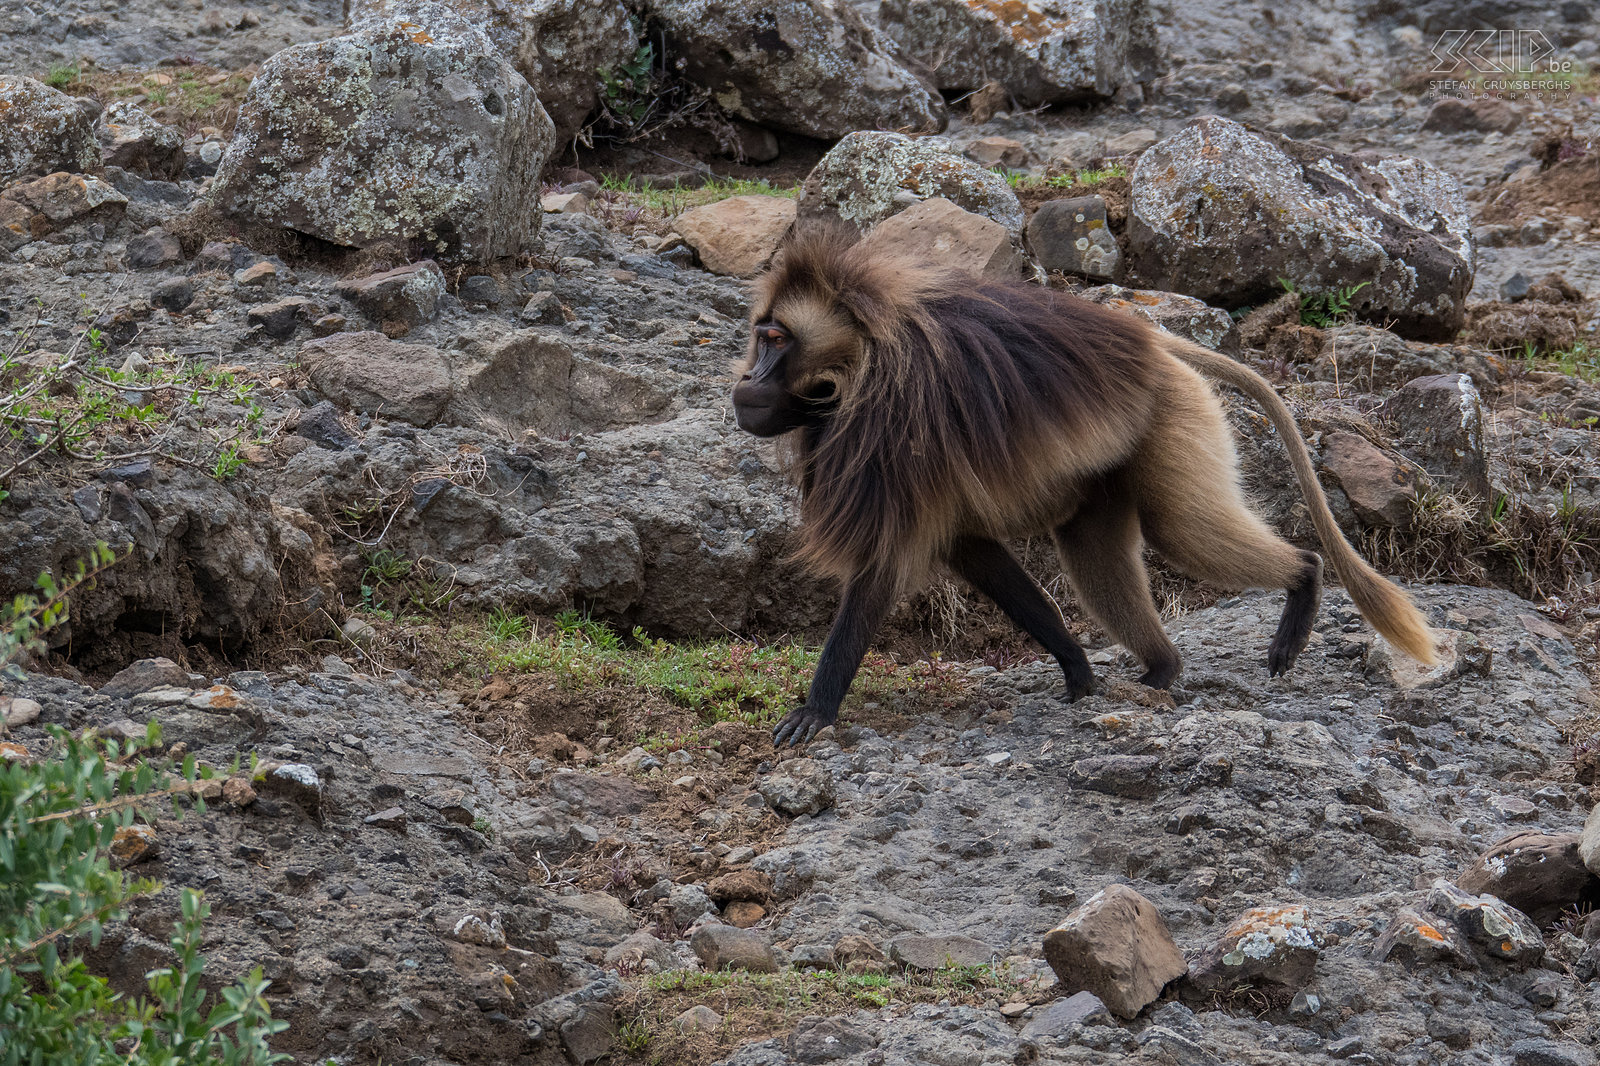 Debre Libanos - Male gelada The gelada (Theropithecus gelada) is a baboon species that only lives in the high mountains of northern Ethiopia. They mainly feed on grass that they pick with their hands. It is the only monkey species that grazes. Gelada's life in large groups. Within the group, distinct harems can be distinguished: an adult male, a bunch of females and juveniles. Adult males stands out with their long heavy cape of hair and bright patch of skin on their chest. Stefan Cruysberghs